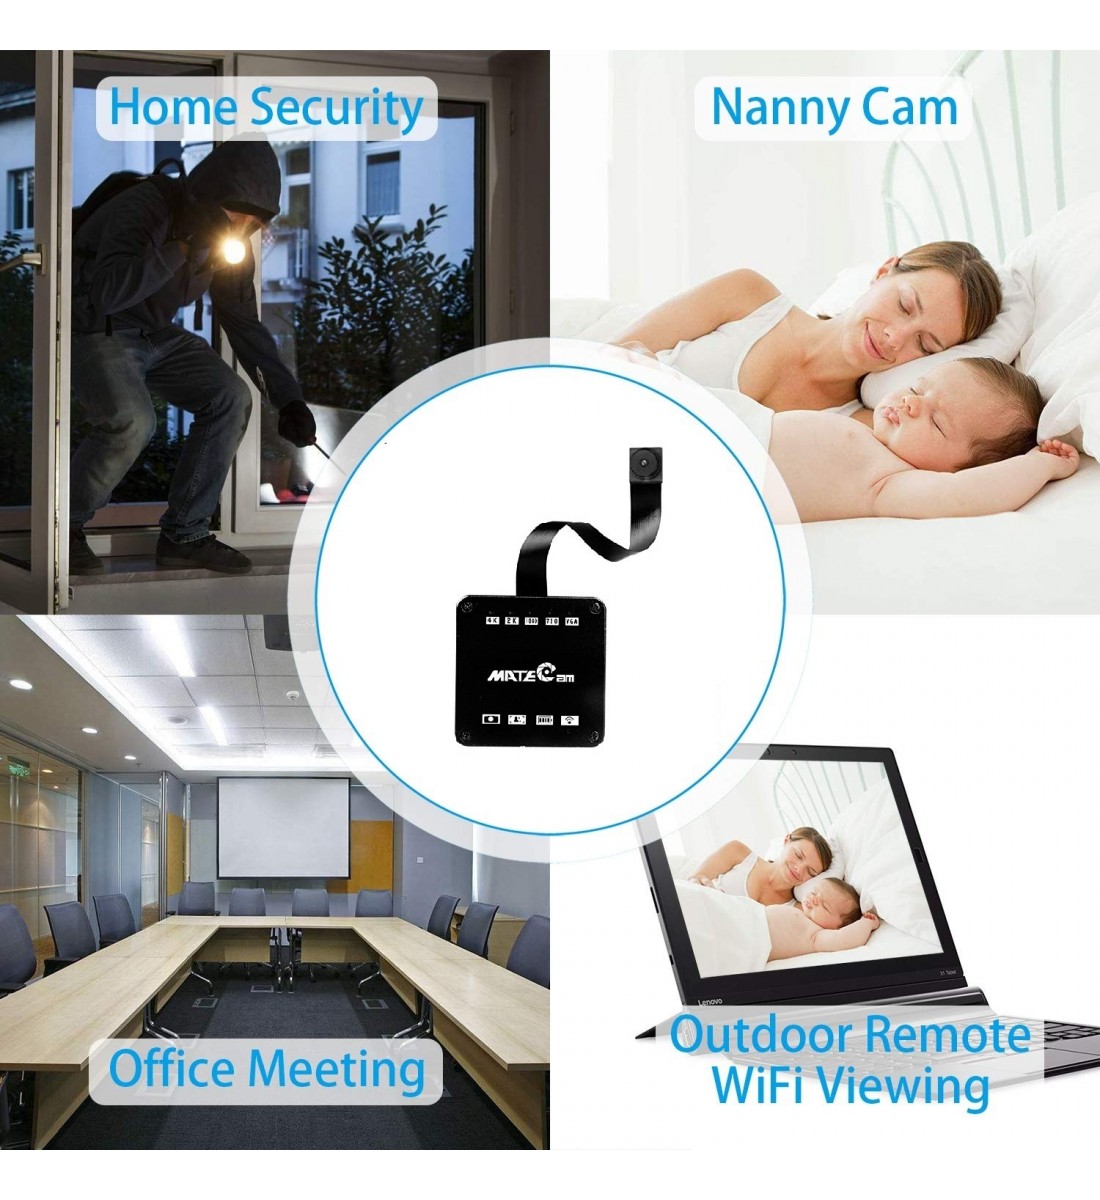 4K Real Ultra HD WiFi Hidden Spy Camera Mini Camera Wireless Motion Detection Nanny Cam Security System Video Remote View Camera Monitor Baby Office spy Cam App Camcorder Kid With 4000mah Battery (2)